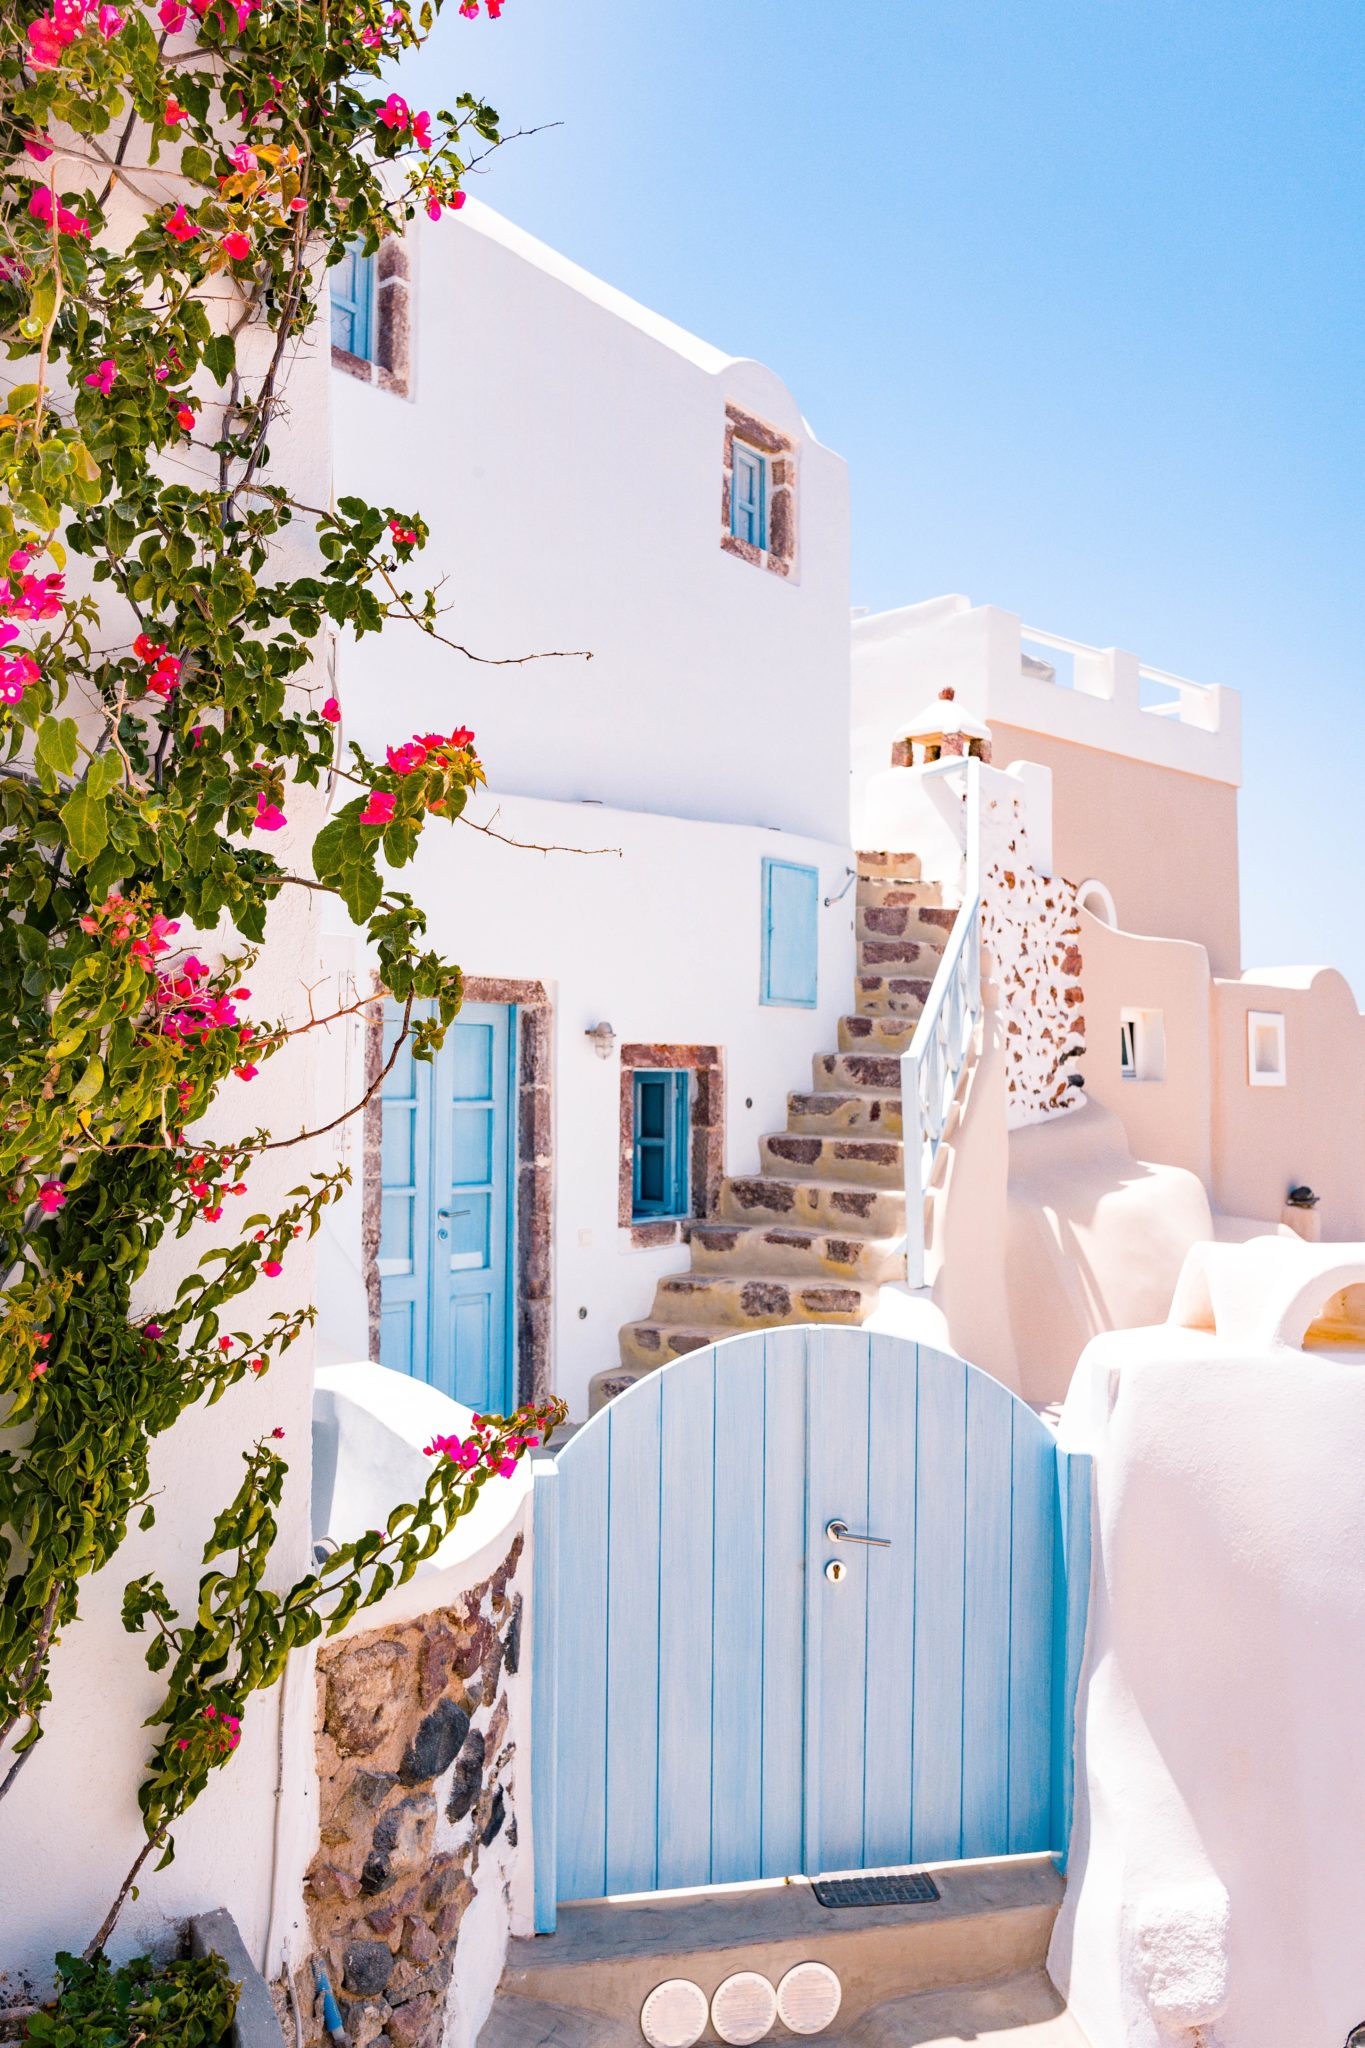 The 9 most romantic cities in Europe - World of Wanderlust